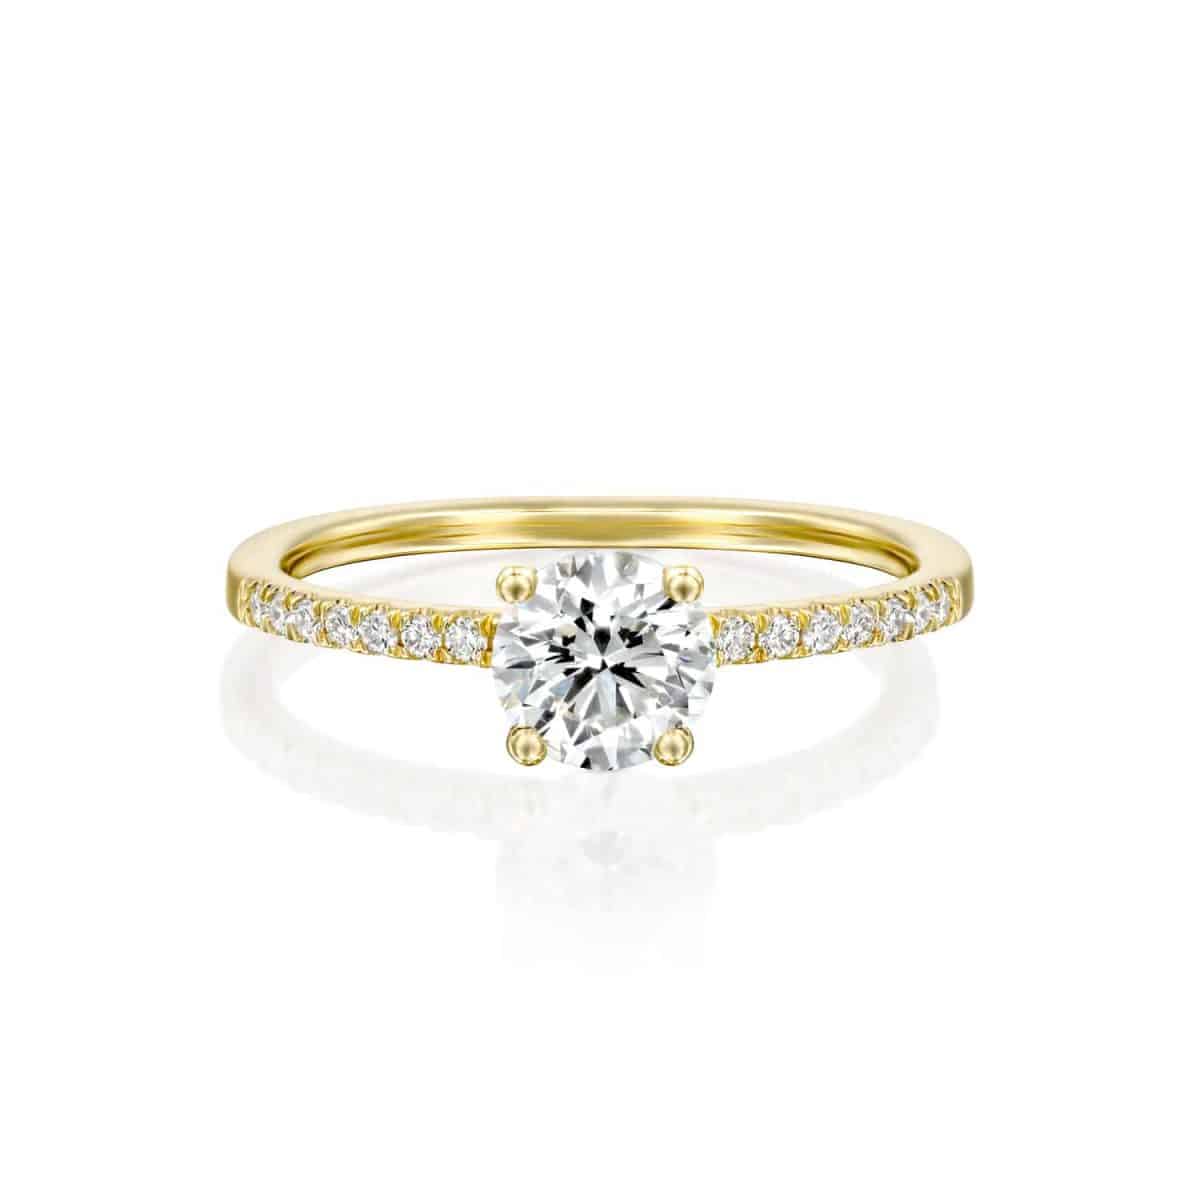 "Carol" - White Gold Lab Grown Diamond Engagement Ring (classic & delicate design) 1.00ct. - laying